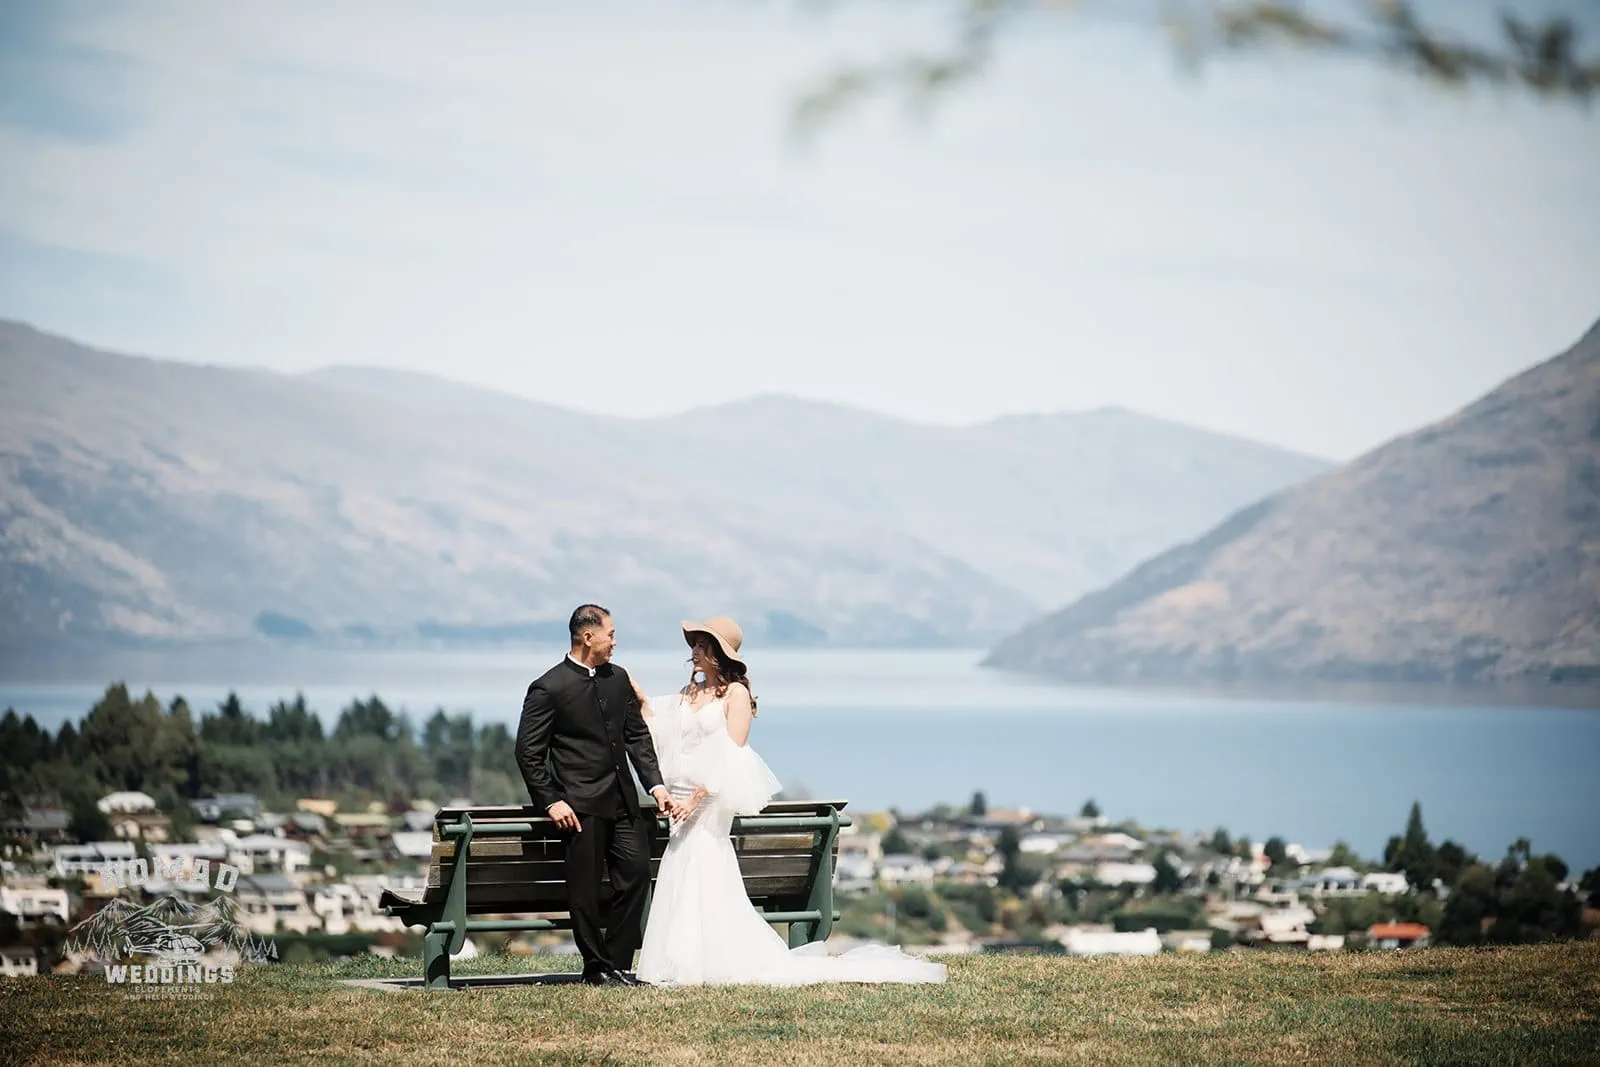 A pre-wedding shoot of Nhi & Nicholas on a bench overlooking Lake Wanaka in Queenstown, NZ.